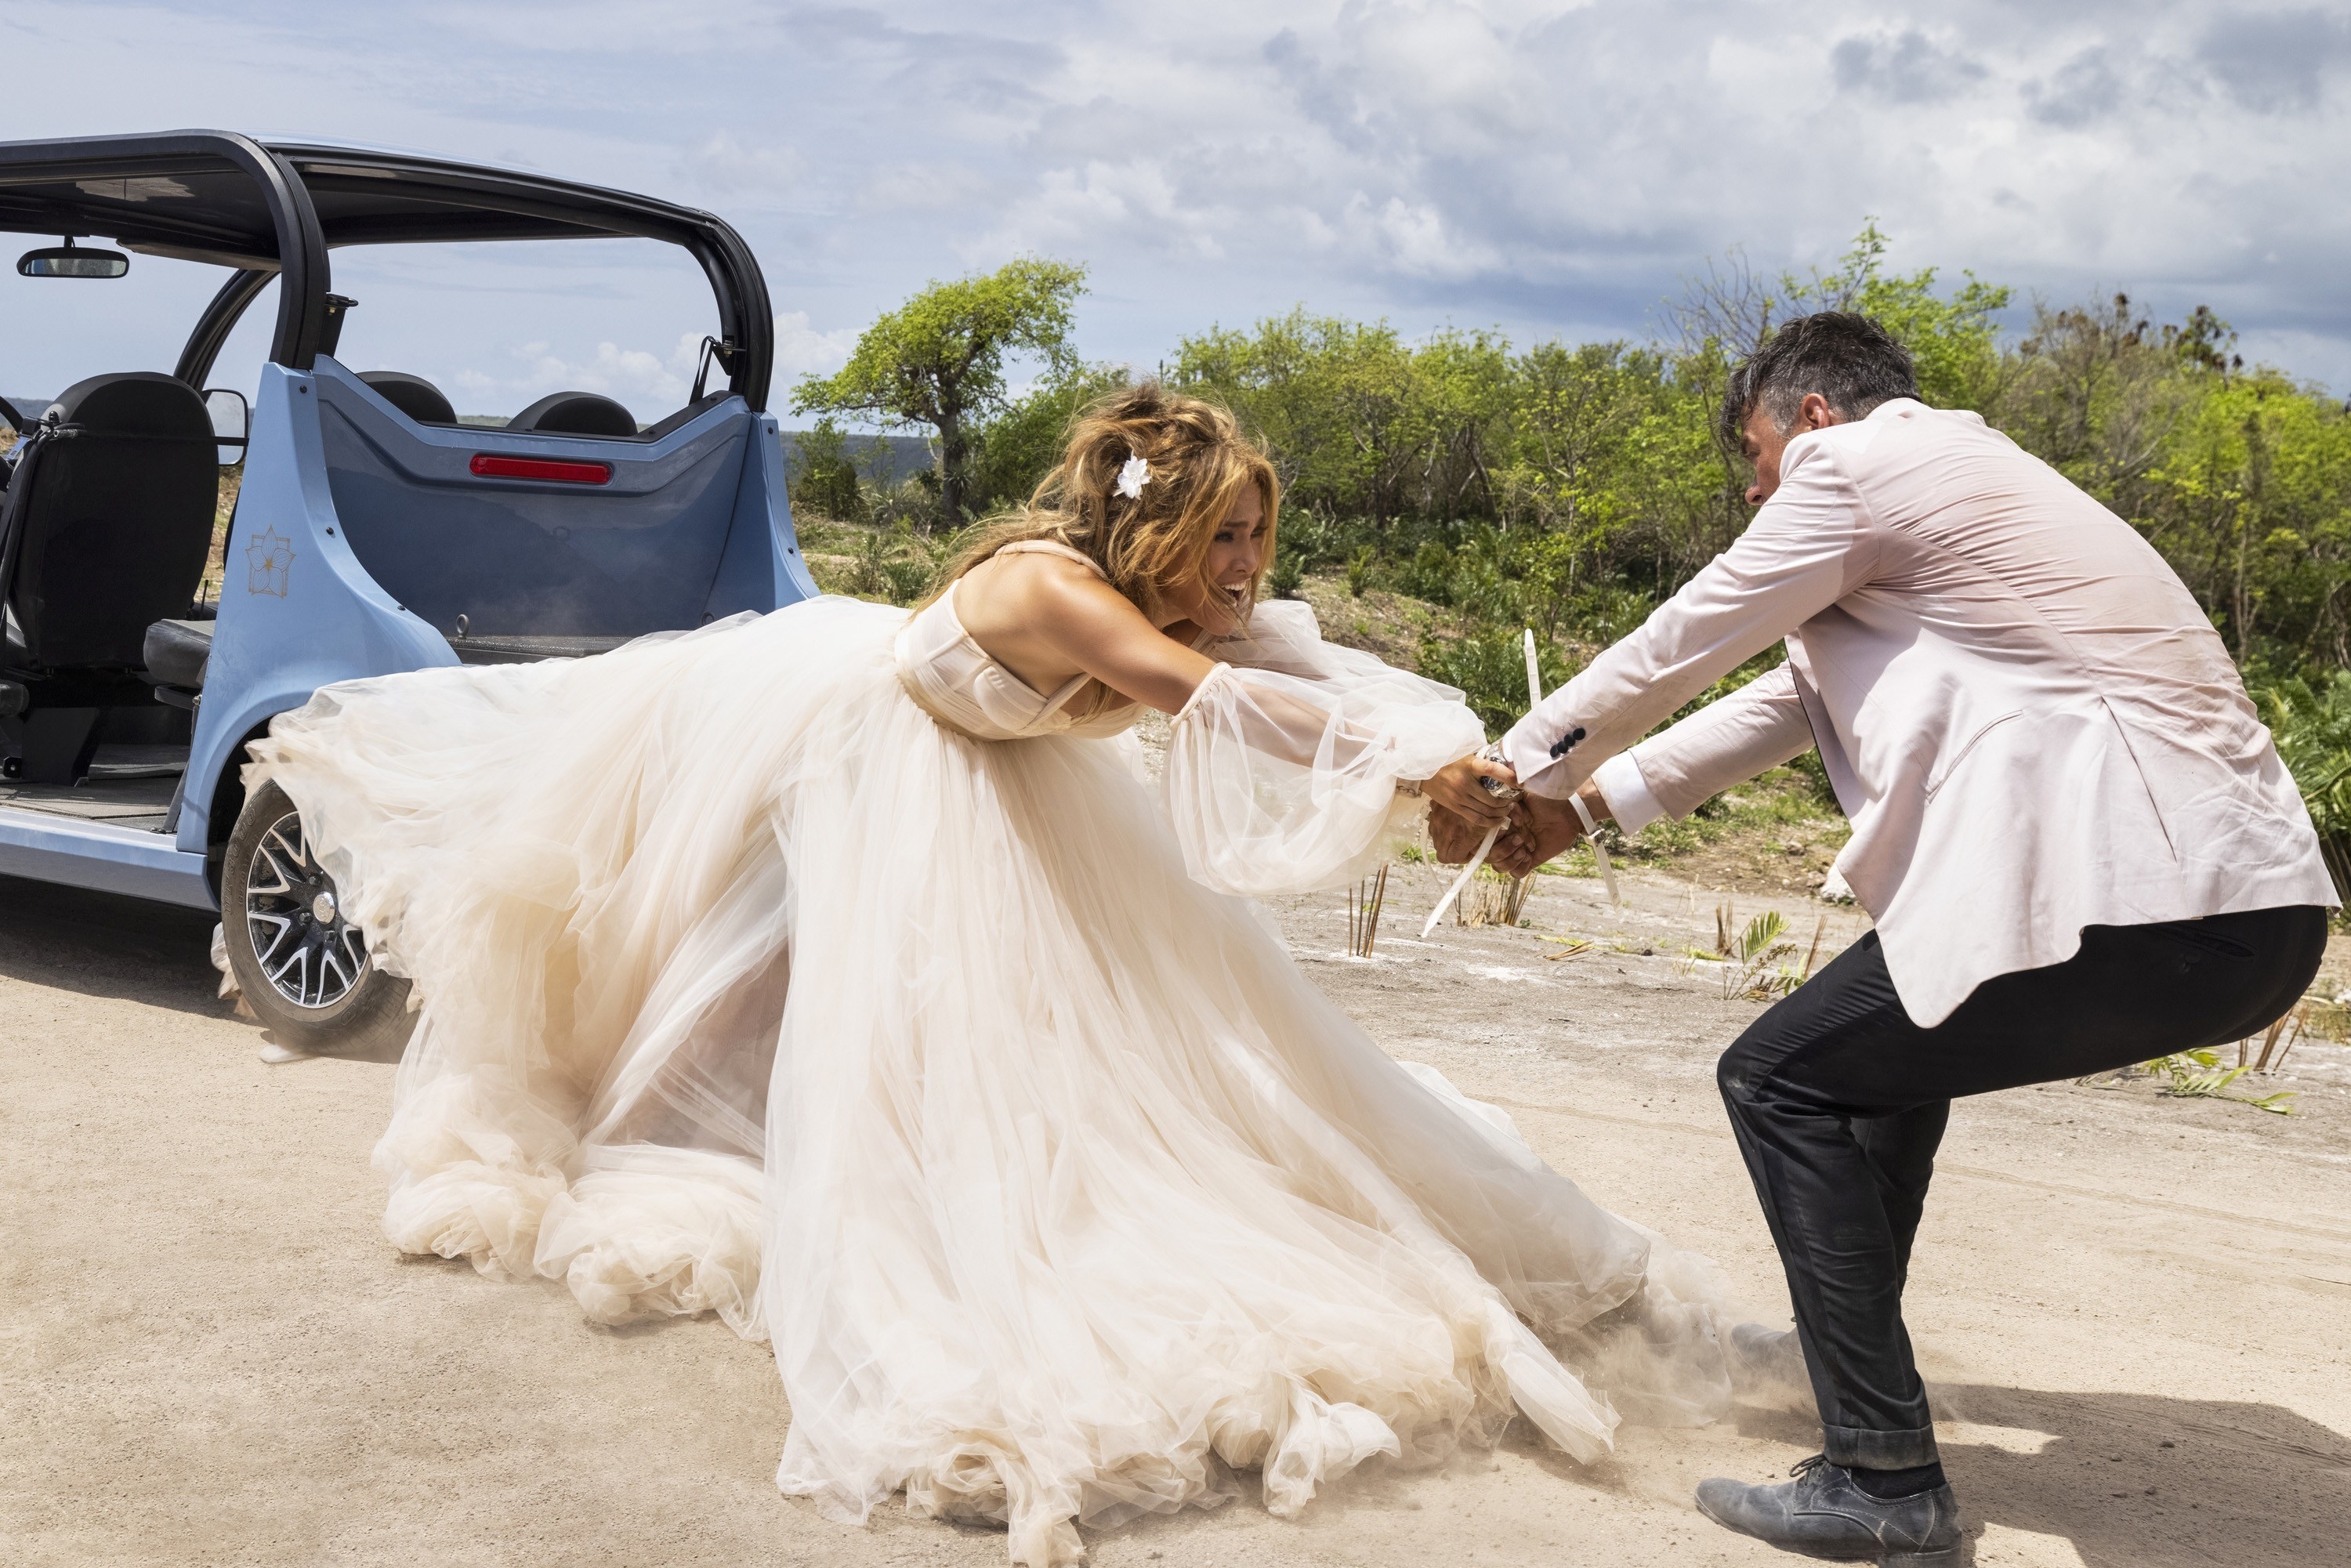 The scene from the film shows J.Lo&#x27;s dress caught in the back wheel of the car as it tumbles off a cliff and Josh pulls her back to safety